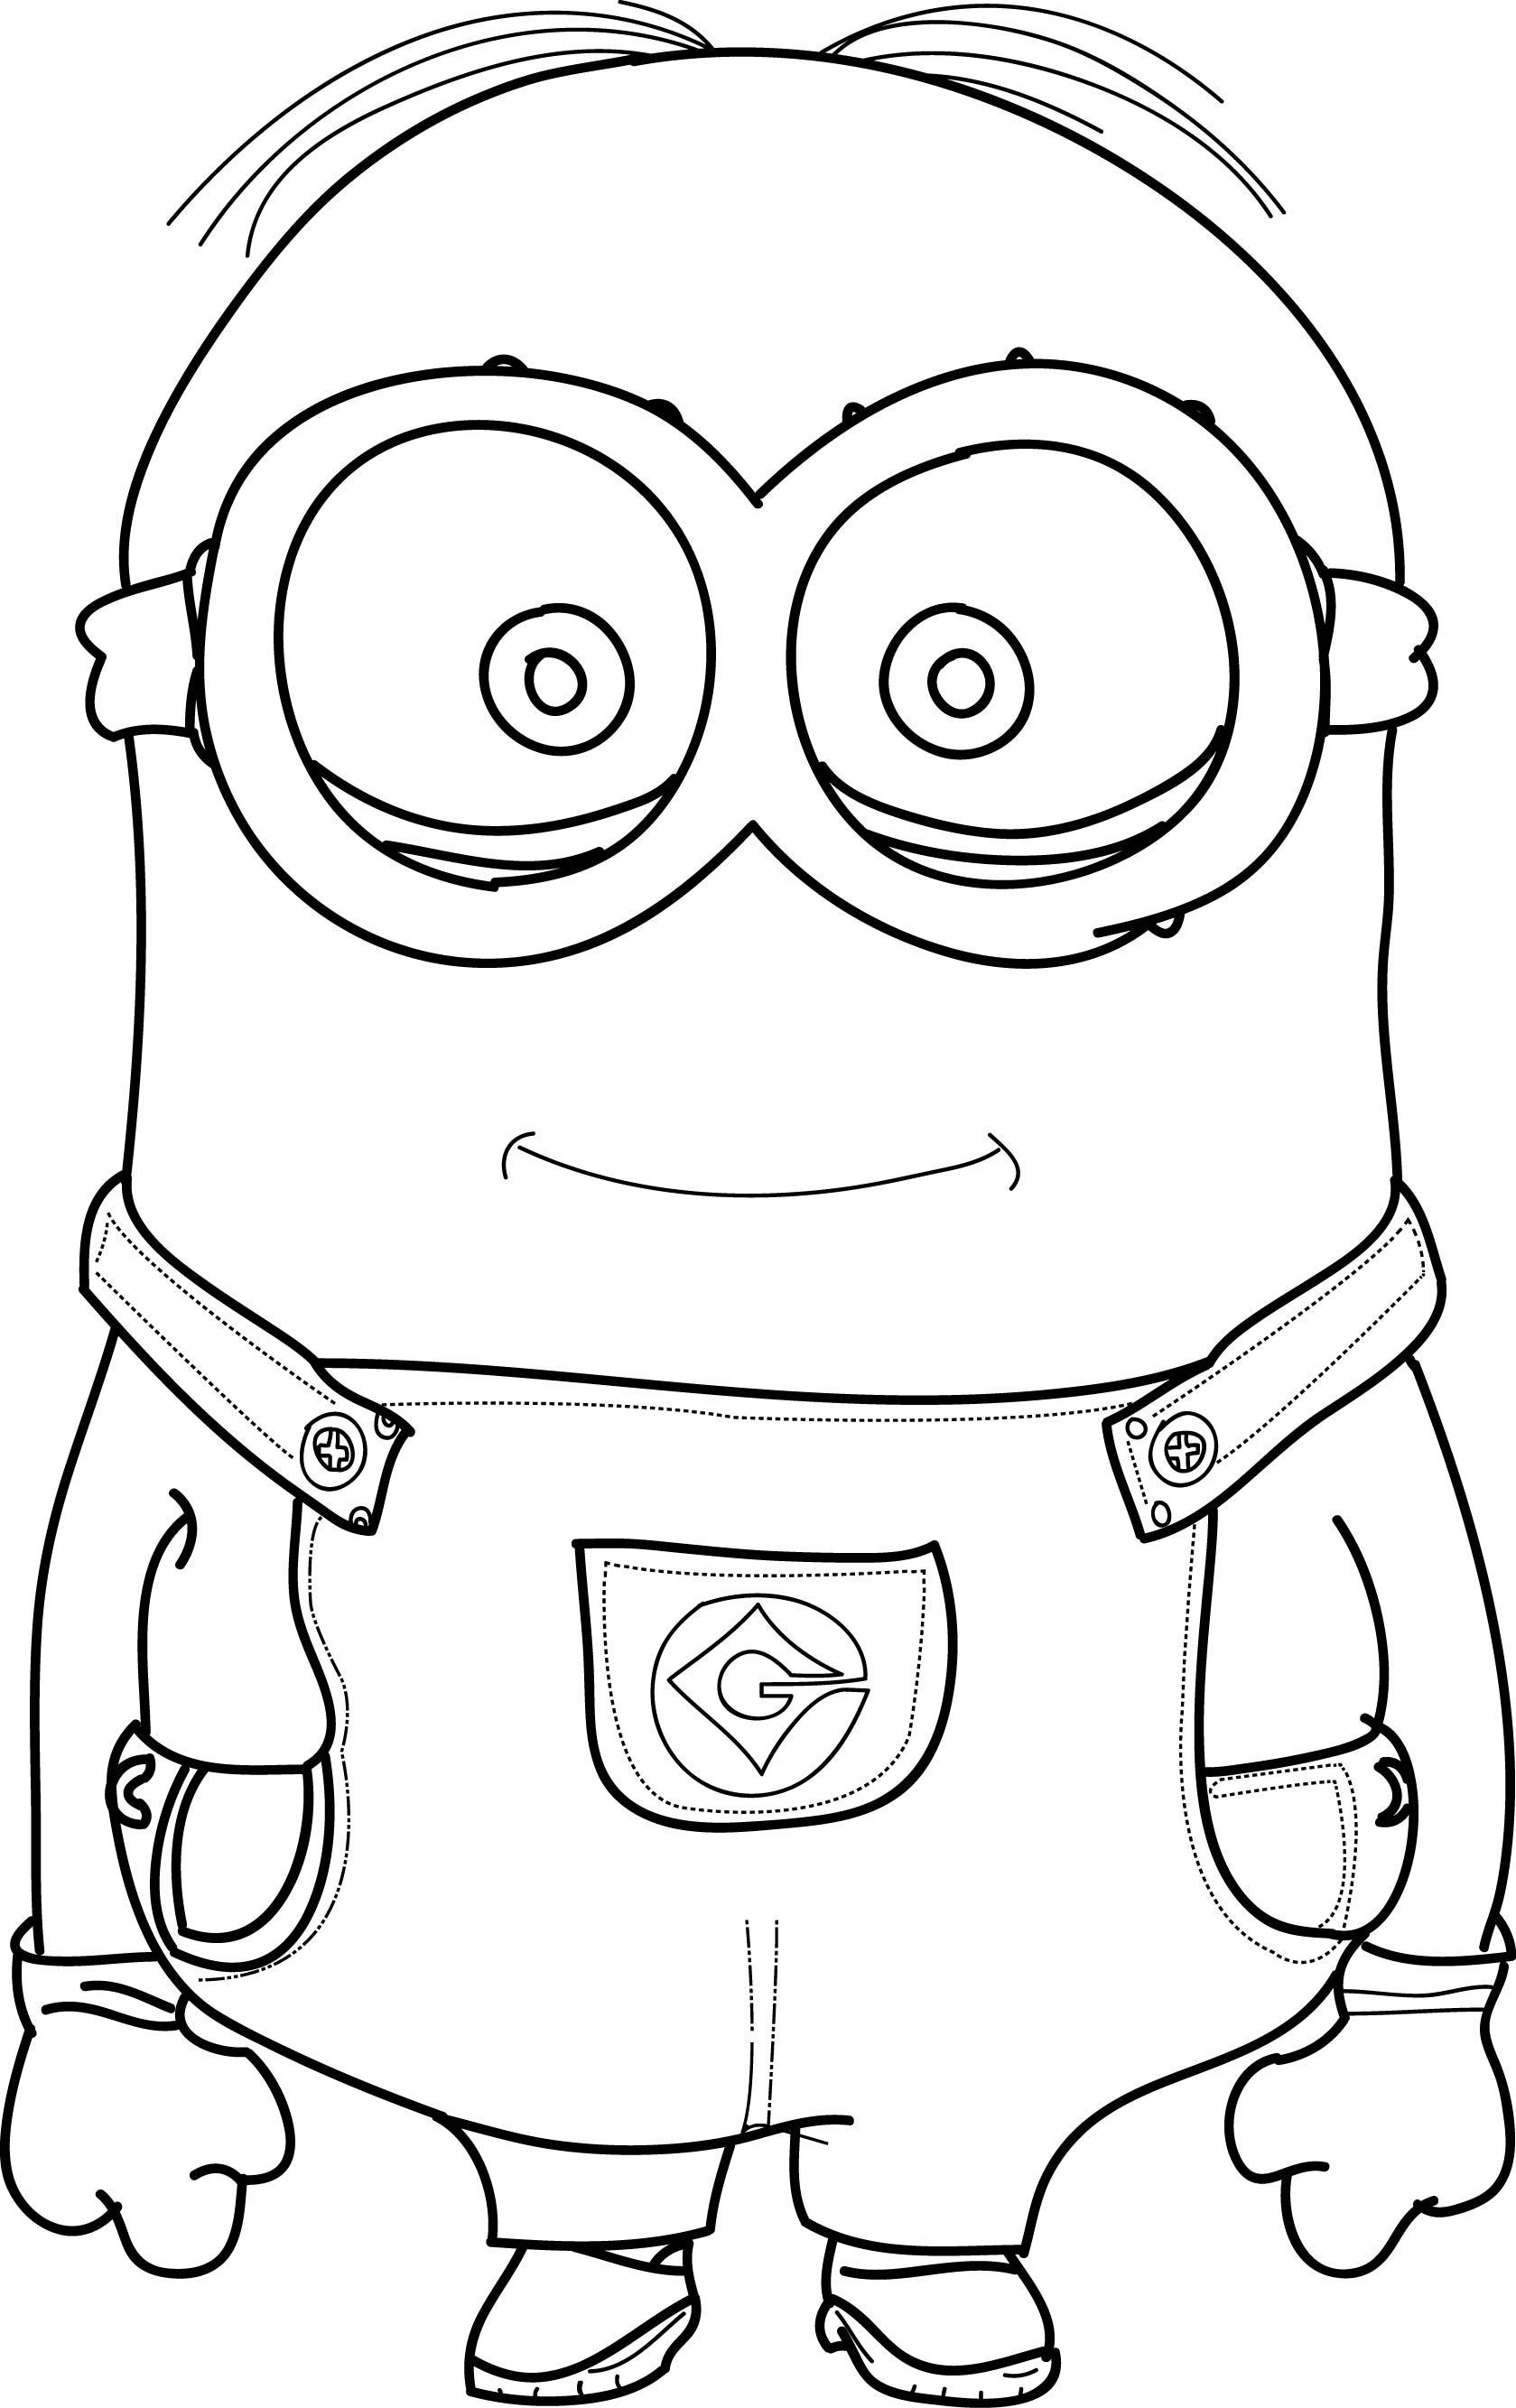 Movie Coloring Pages For Boys
 Minions Coloring Pages wecoloringpage